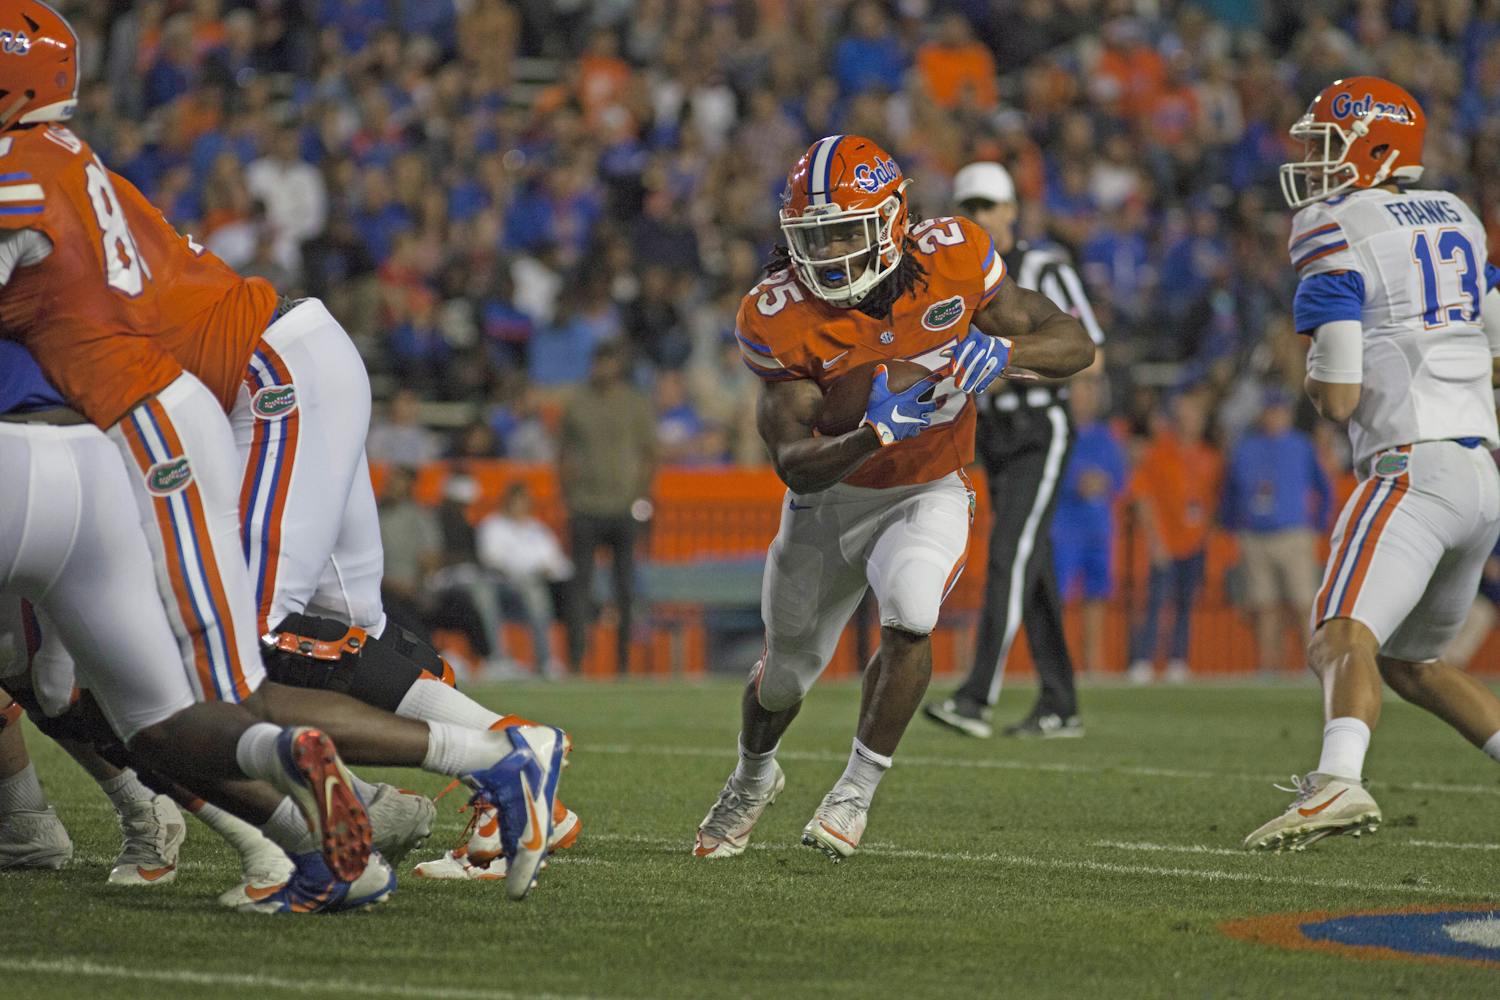 Jim McElwain and the Gators have nothing to lose this Saturday with running back Jordan Scarlett and nine other players suspended against Michigan.